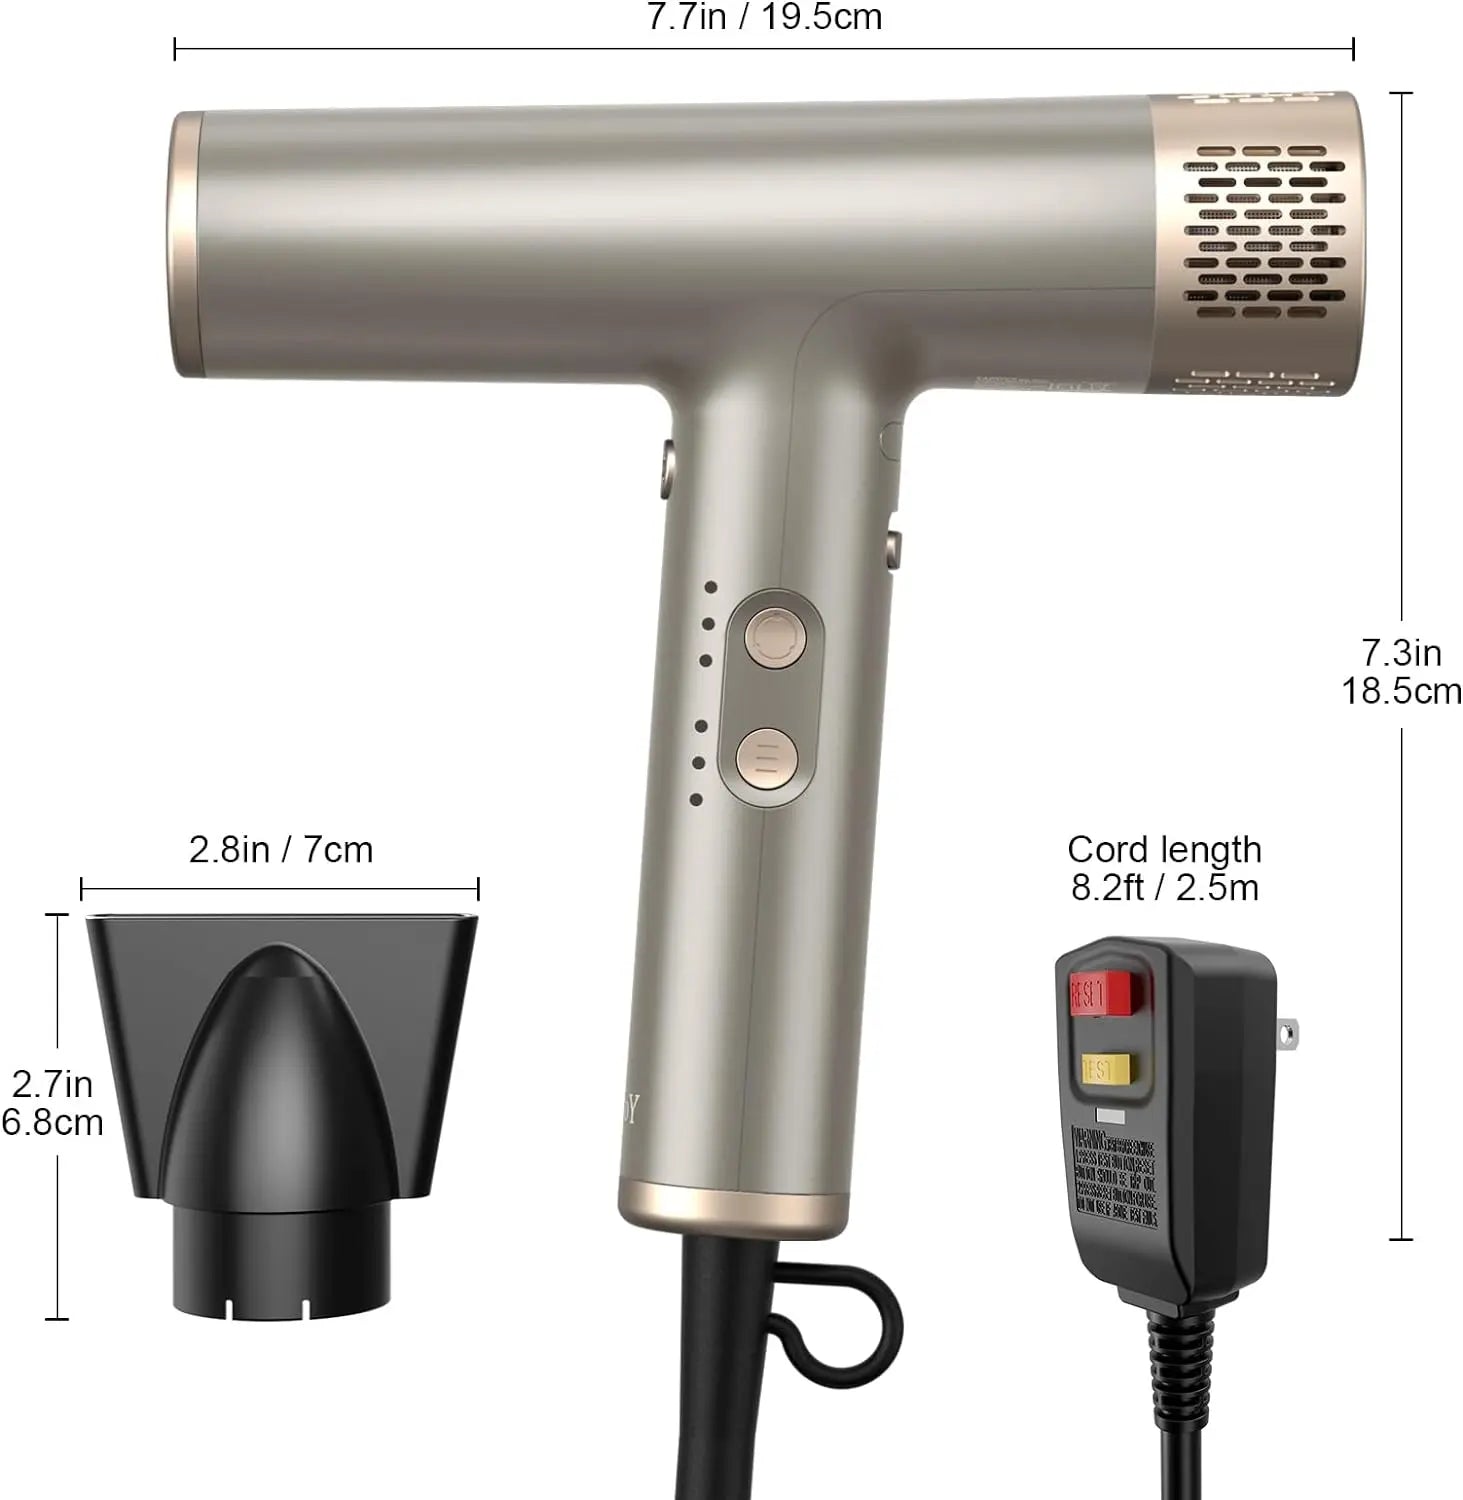 YAPOY High Speed Hair Dryer for a salon-quality experience at home2